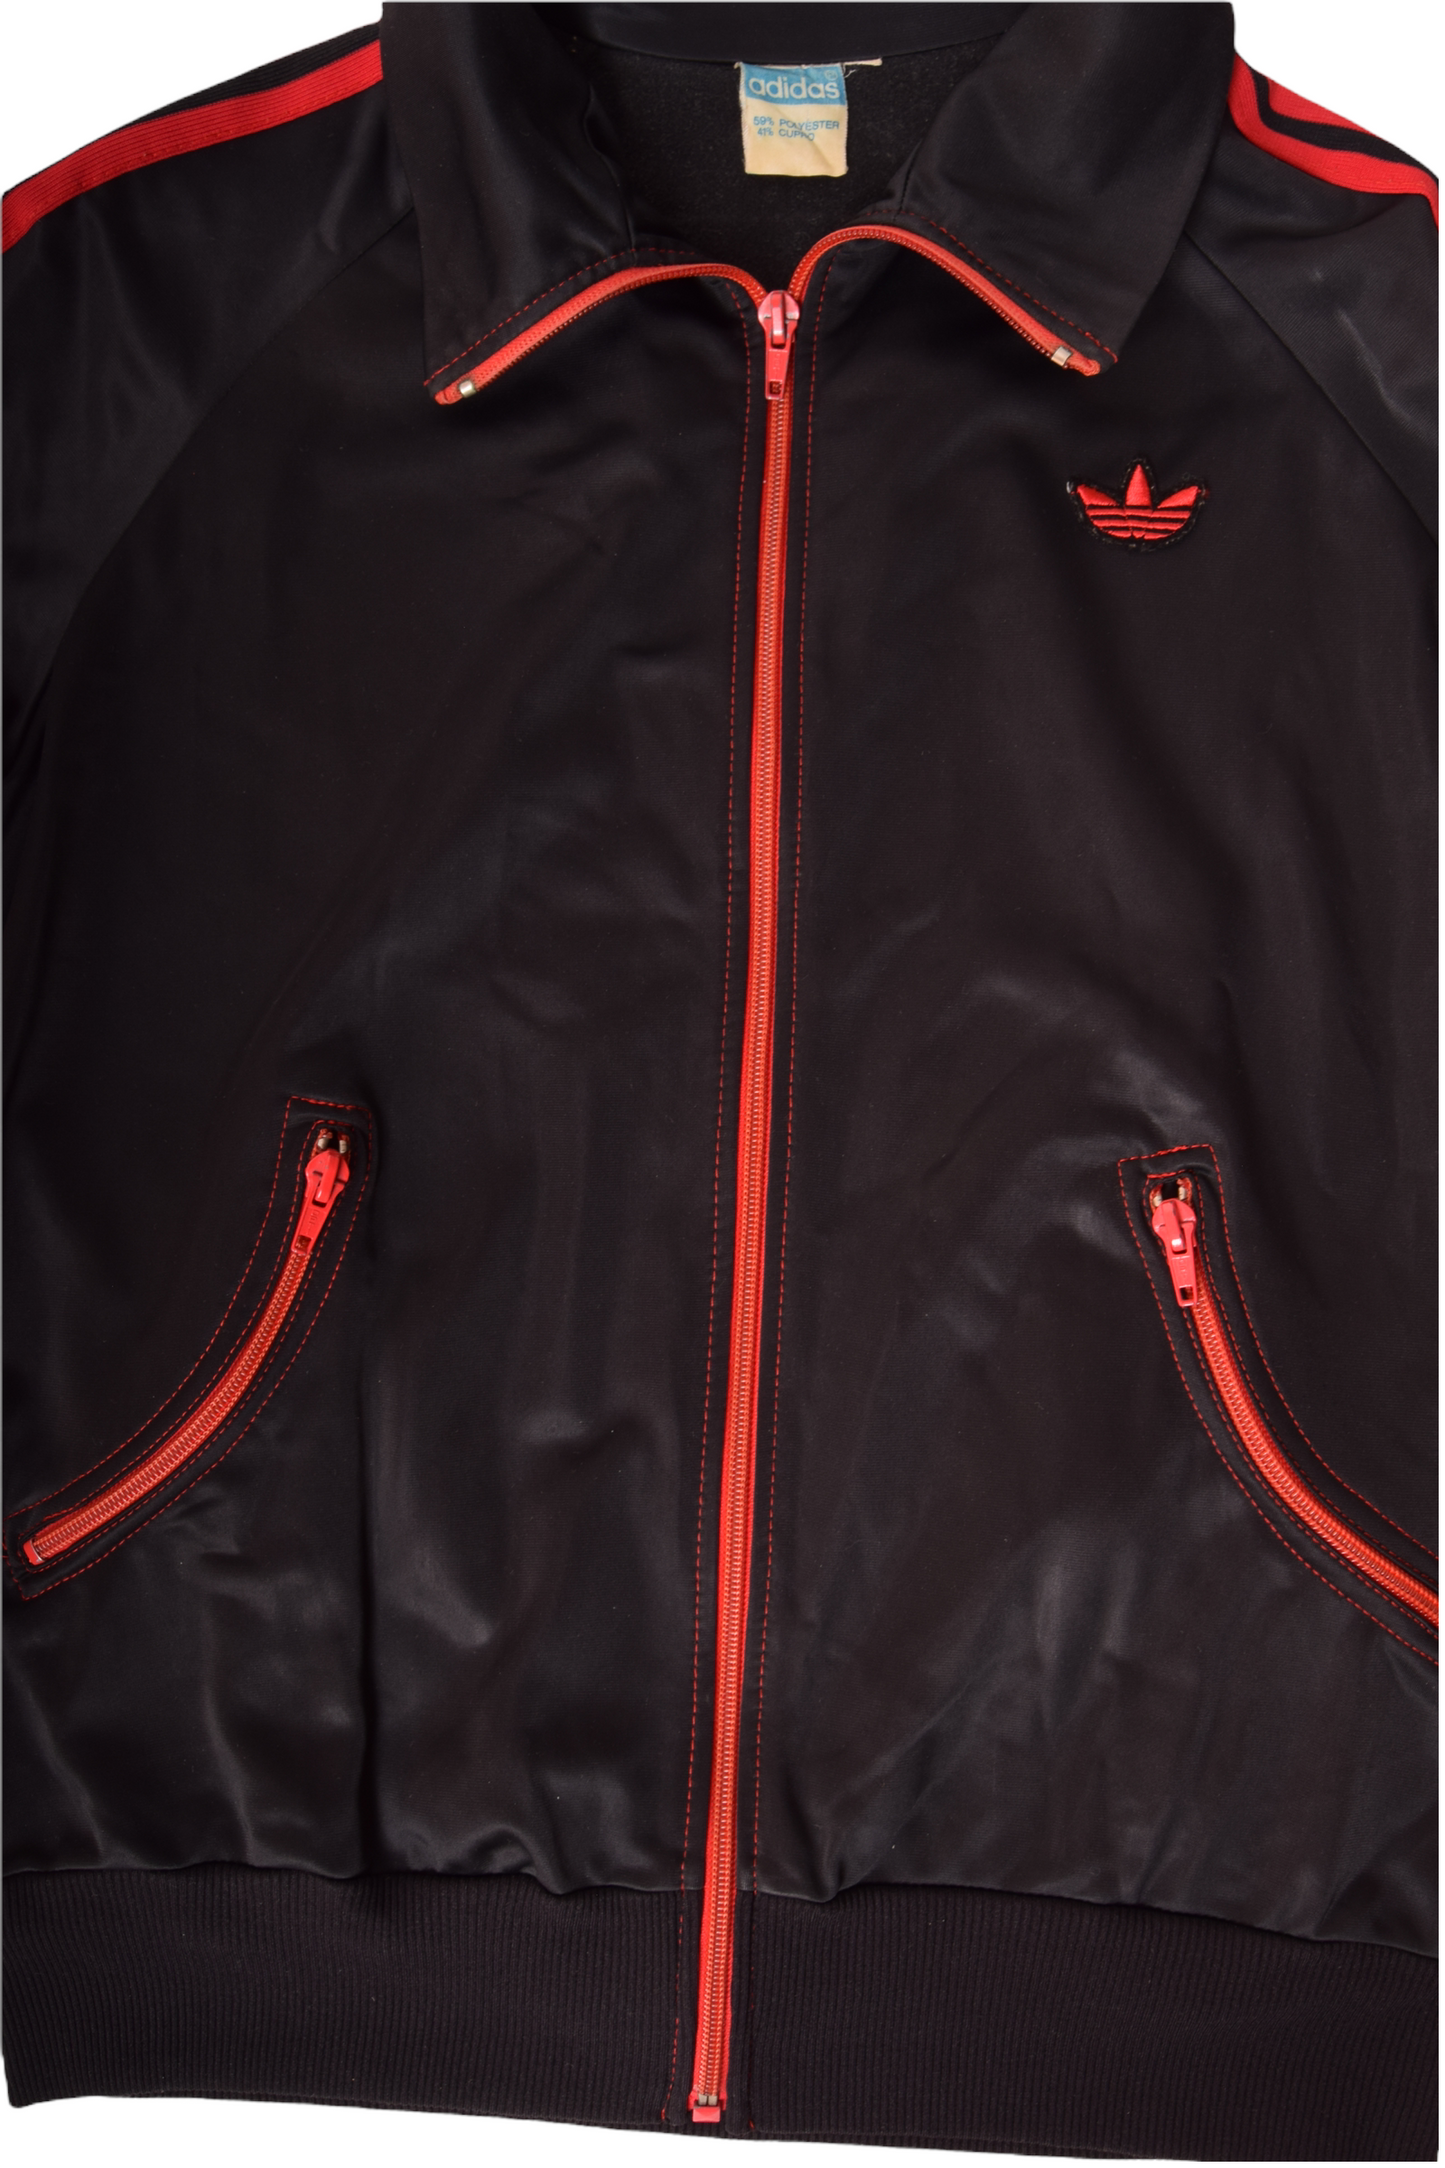 Vintage 70's 80's Adidas Track Top Jacket Size S-M Black Red